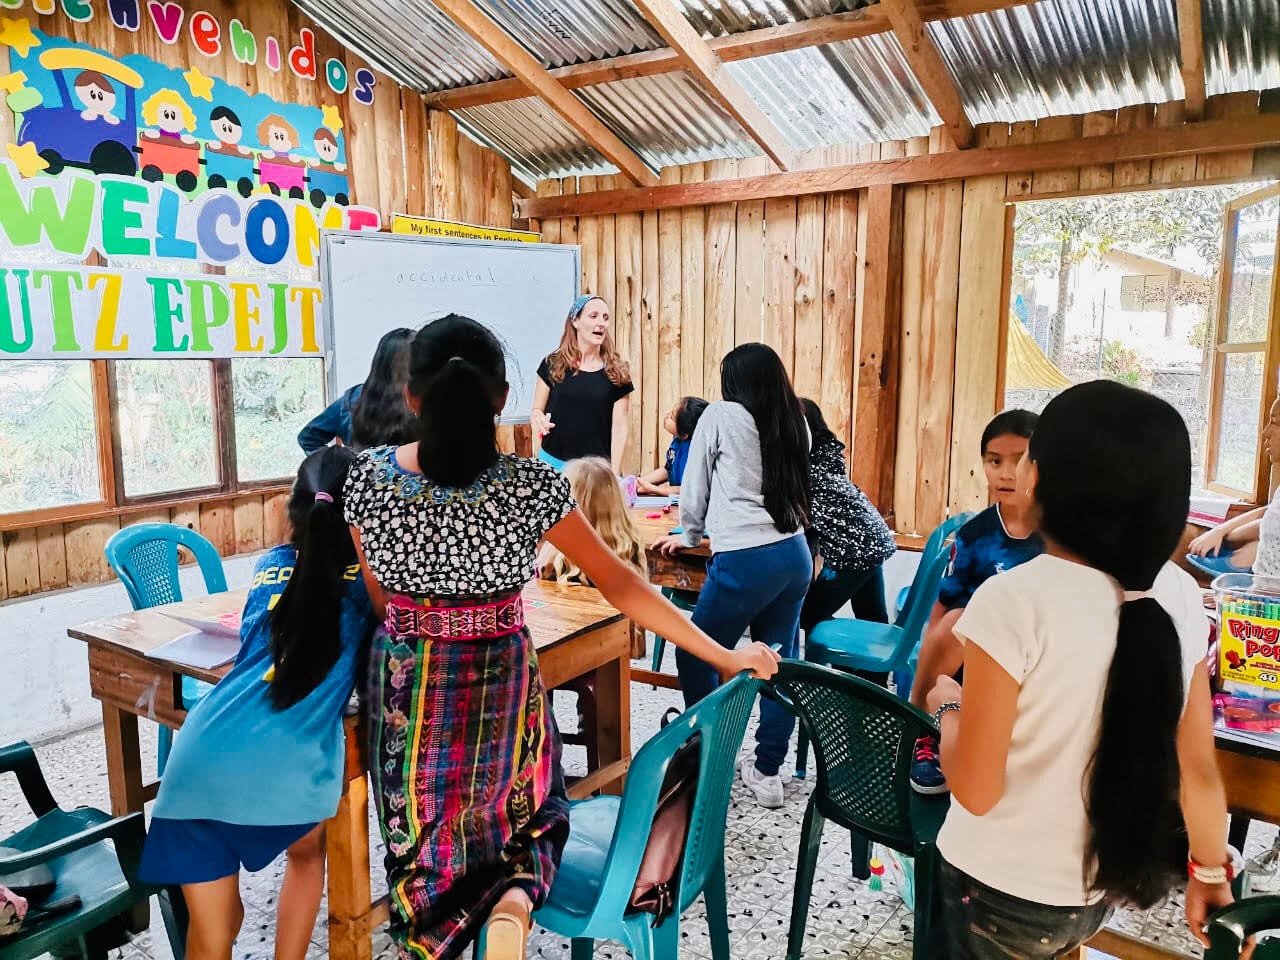 Lauren taught English to Niños del Lago, a project for local kids in San Pedro, Guatemala.